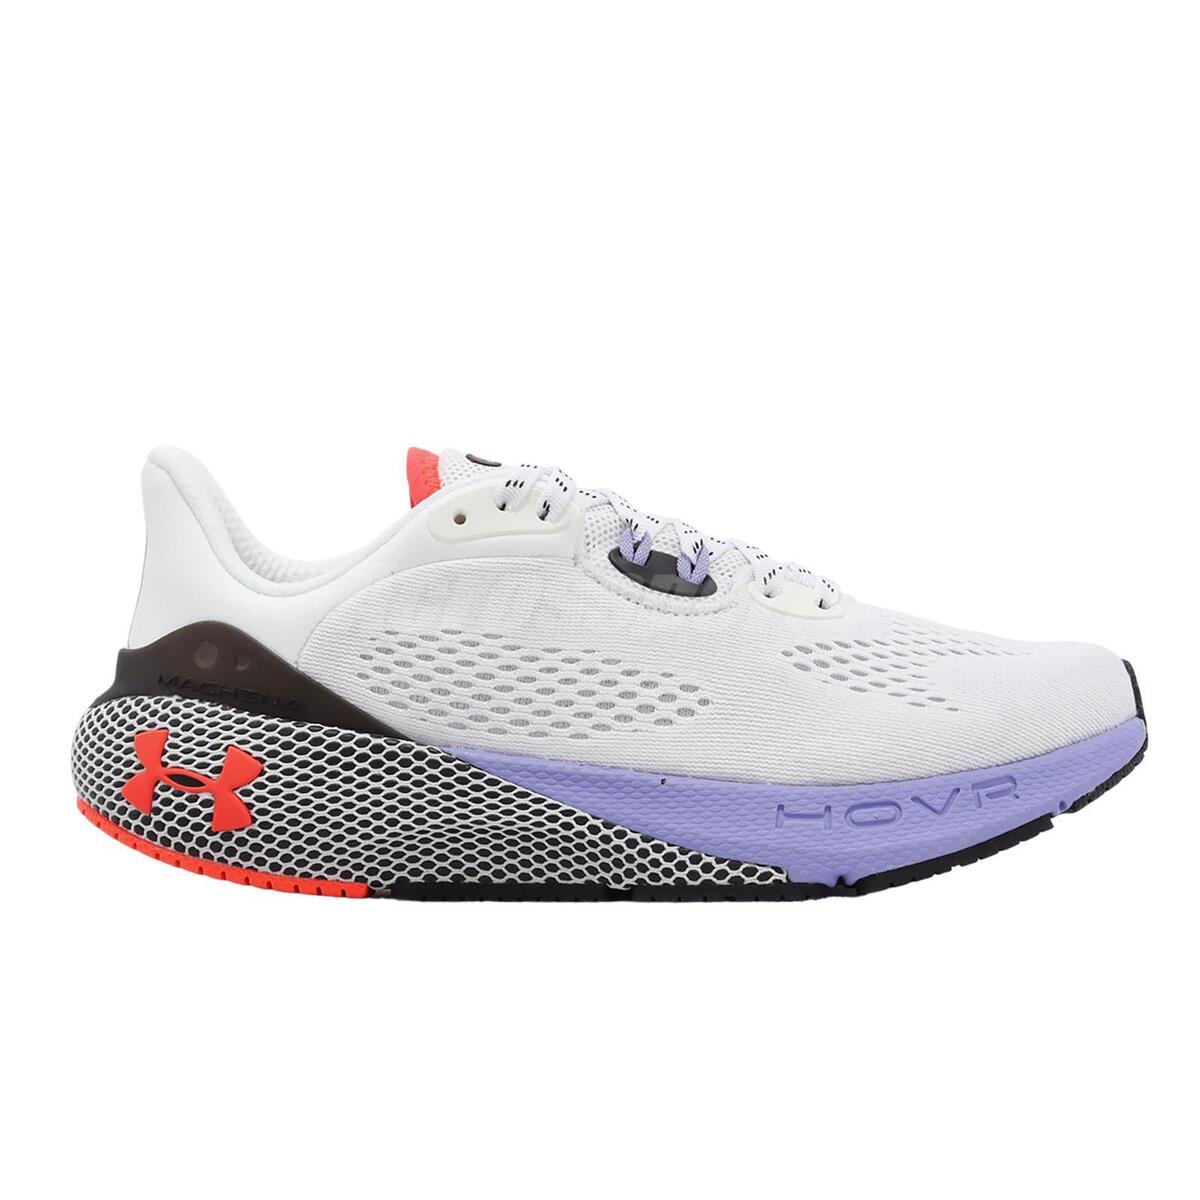 Under Armour HOVR Machina 3 White Black Women Running Shoes Sneakers  3024907-106